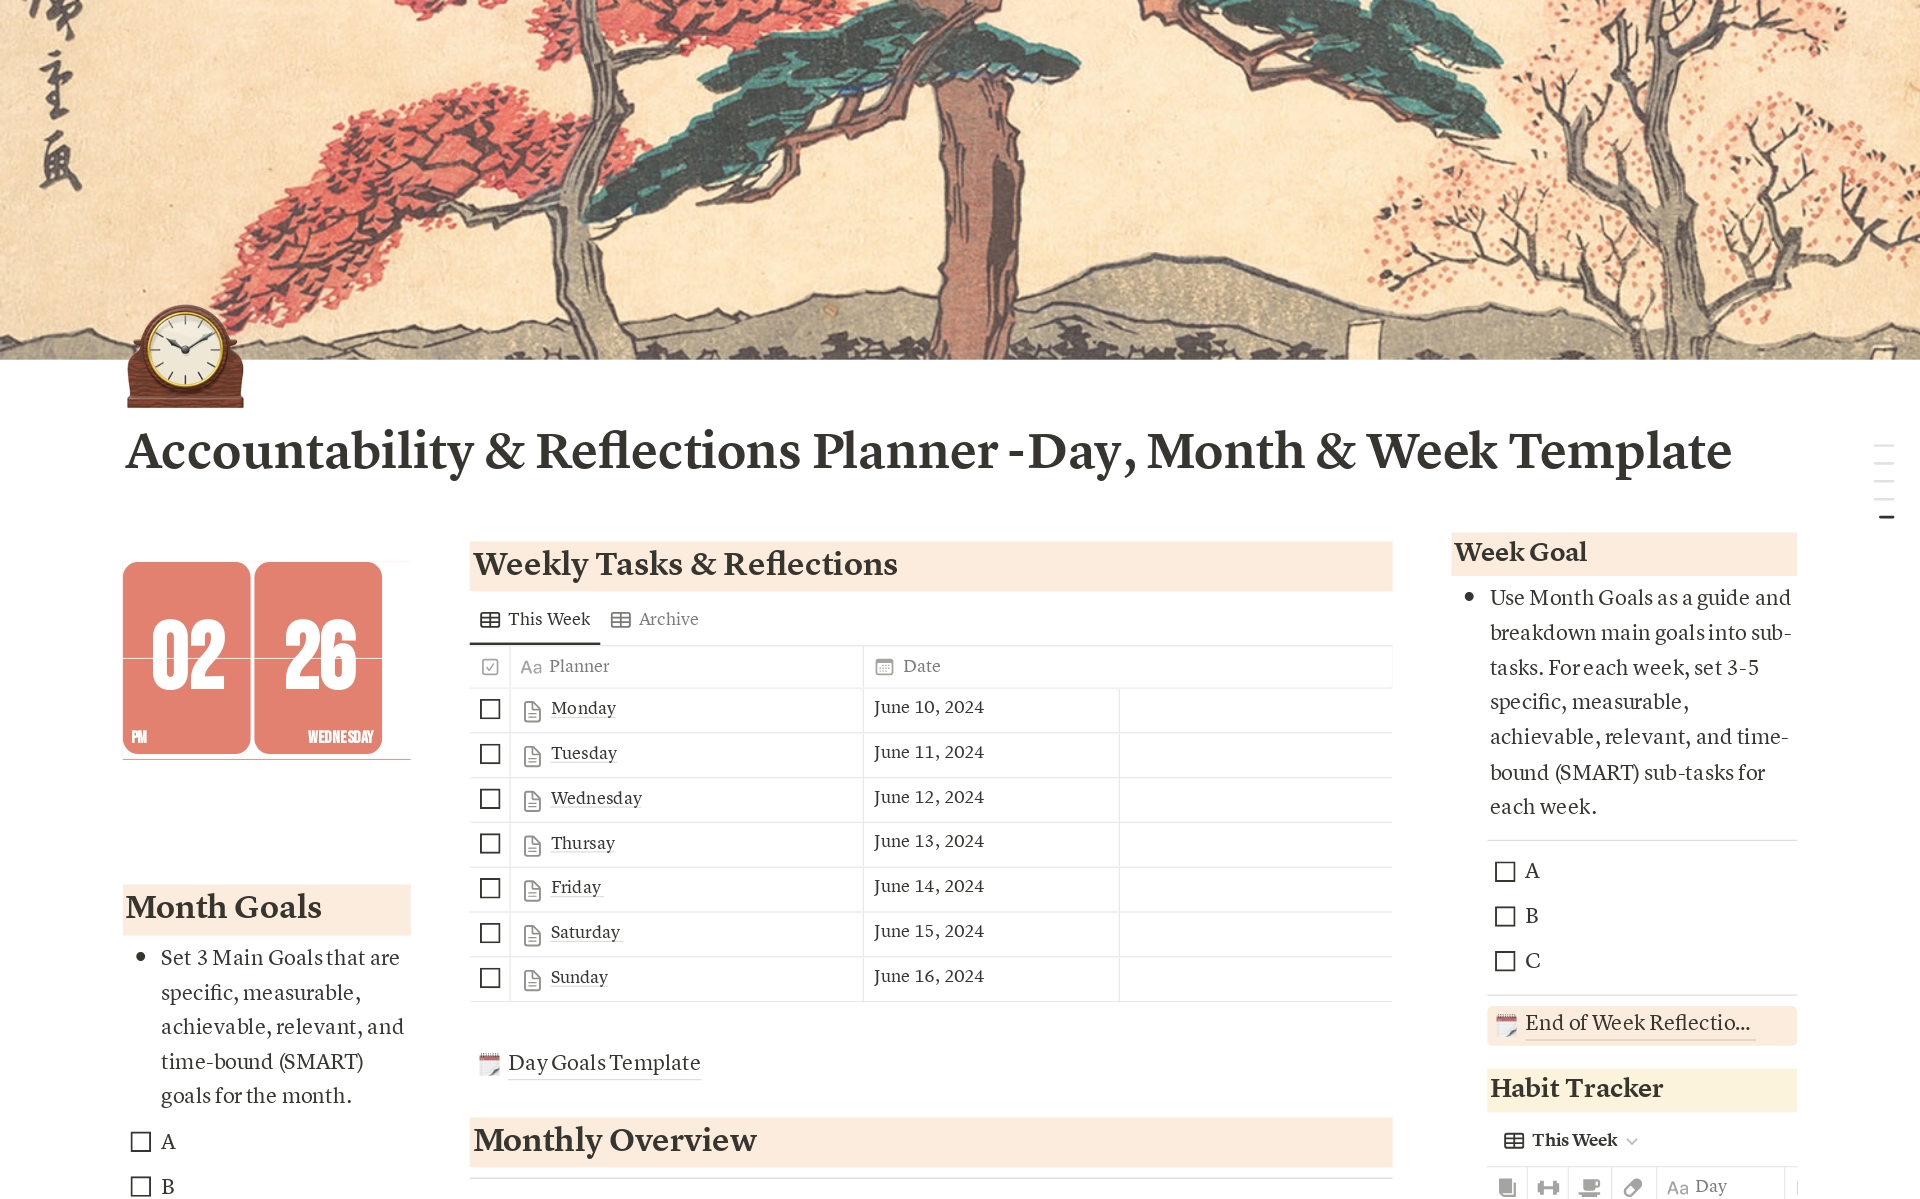 Daily, weekly, and monthly planning sections ; Task prioritization and goal setting ; Reflection prompts to track progress ; Built-in habit tracker to monitor routines; Clean, customizable Notion layout ; Perfect for professionals, students, and productivity enthusiasts